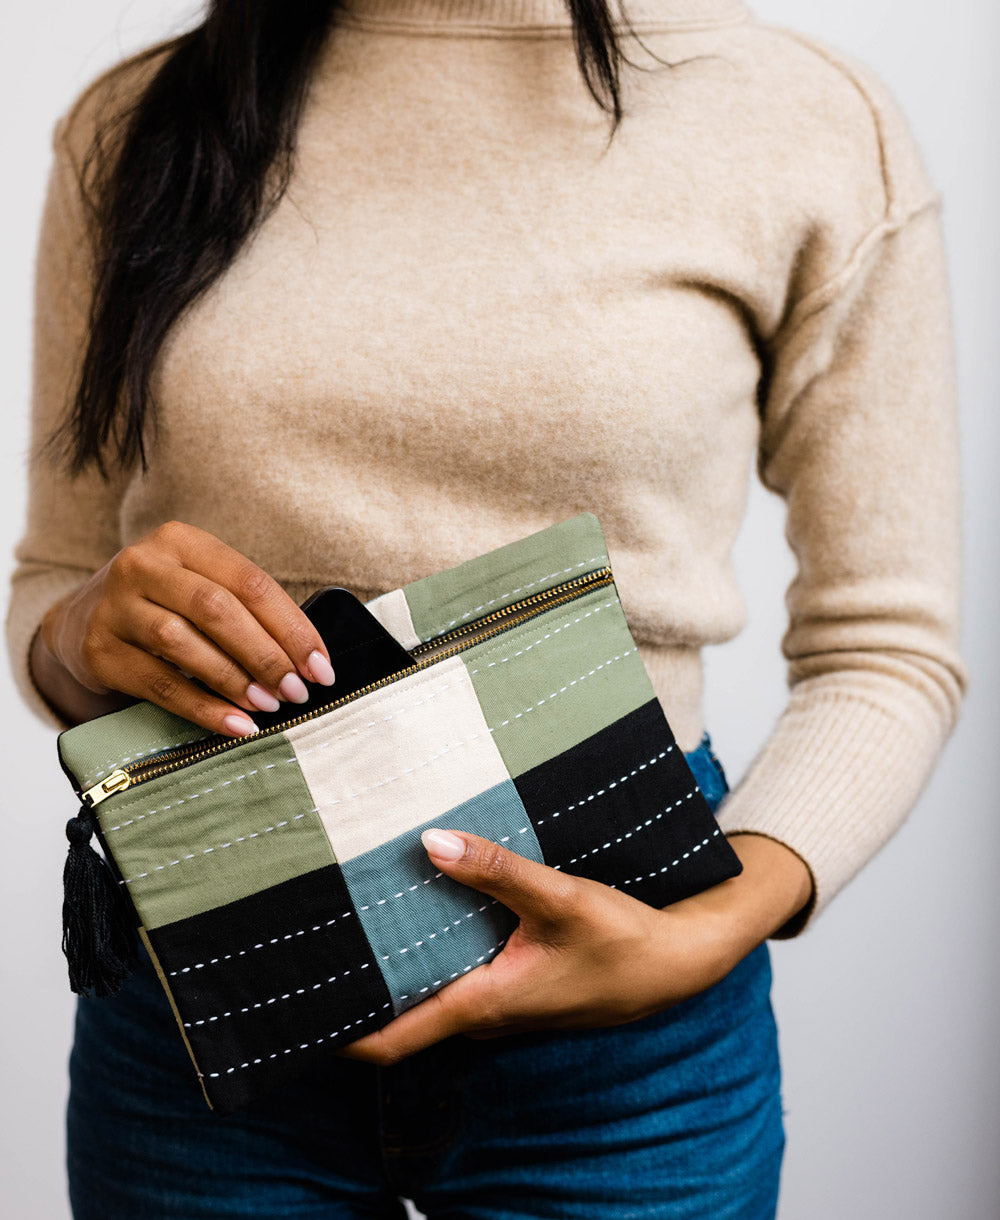 This beautiful contemporary pouch complete with a tassel zipper pull, features a color block checkered design and charming stitch details. Made with organic cotton, use it to stay organized, store makeup, a cell phone, or important receipts.